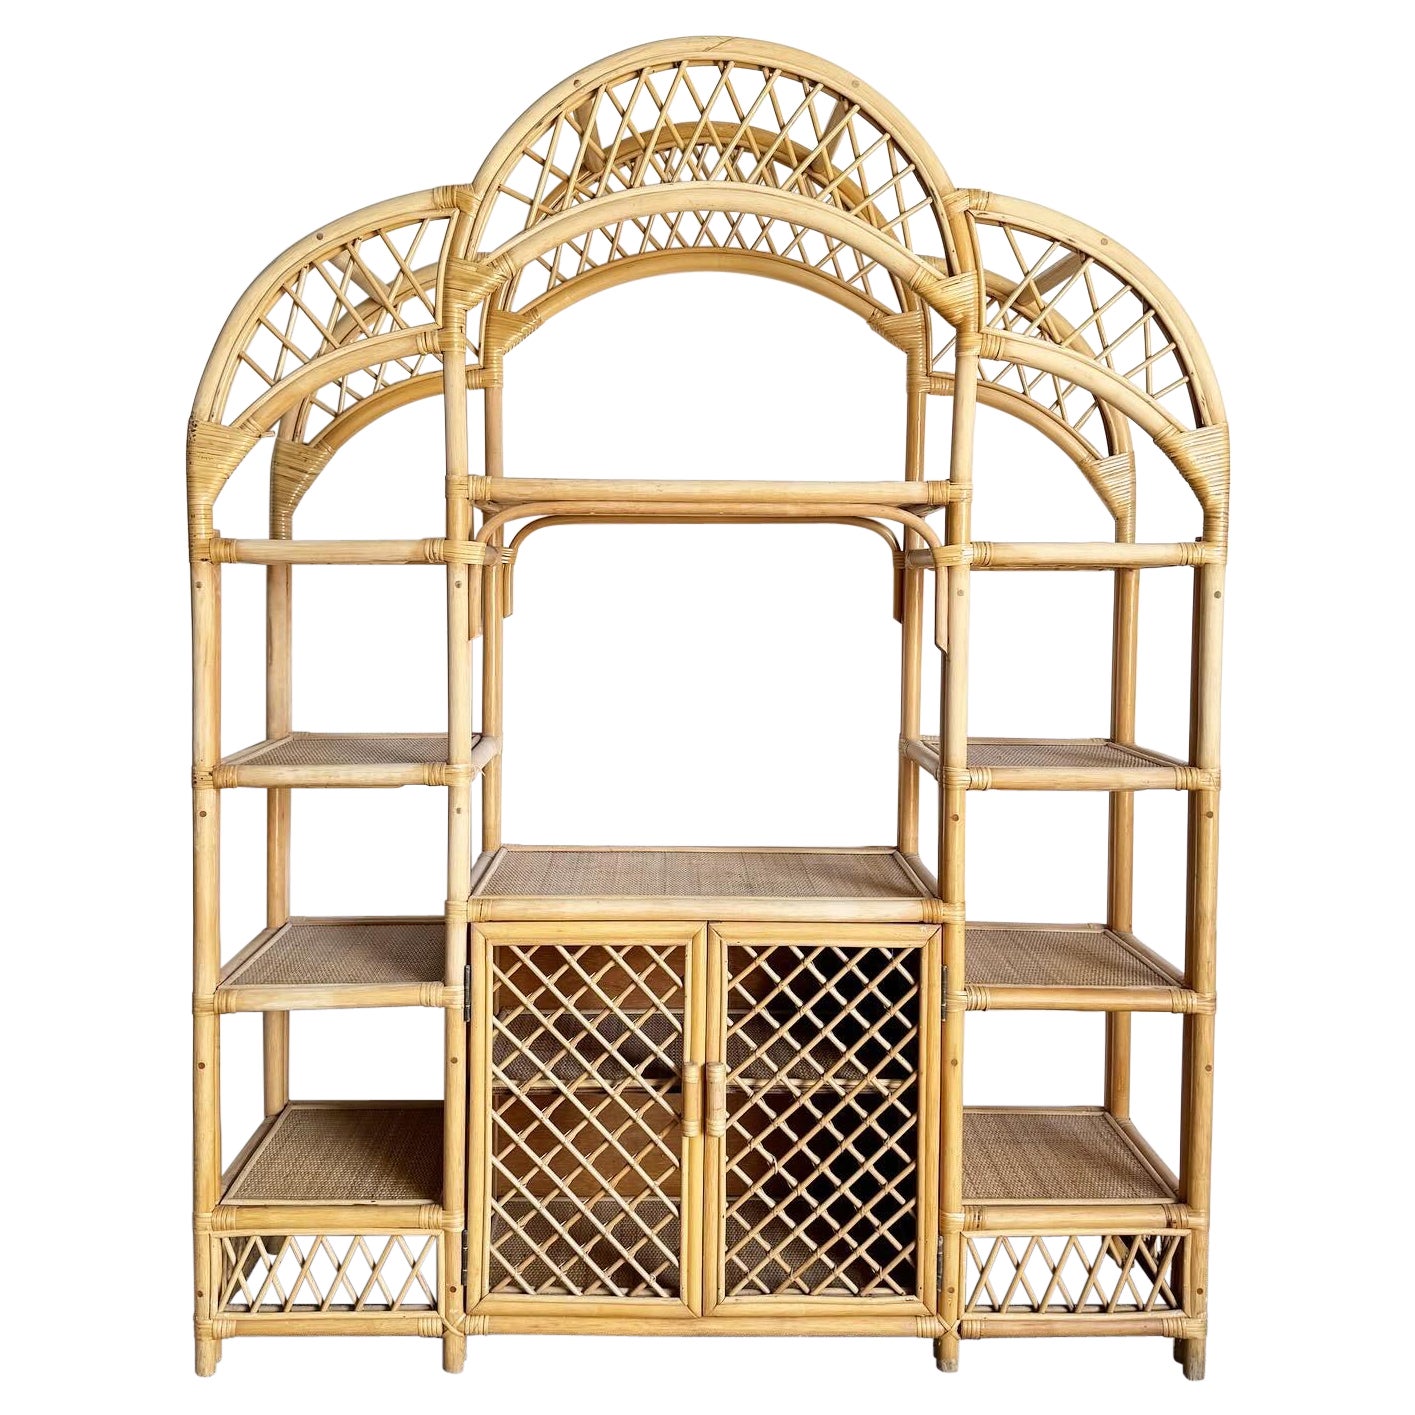 Boho Chic Arched Bamboo Rattan and Wicker Etagere For Sale